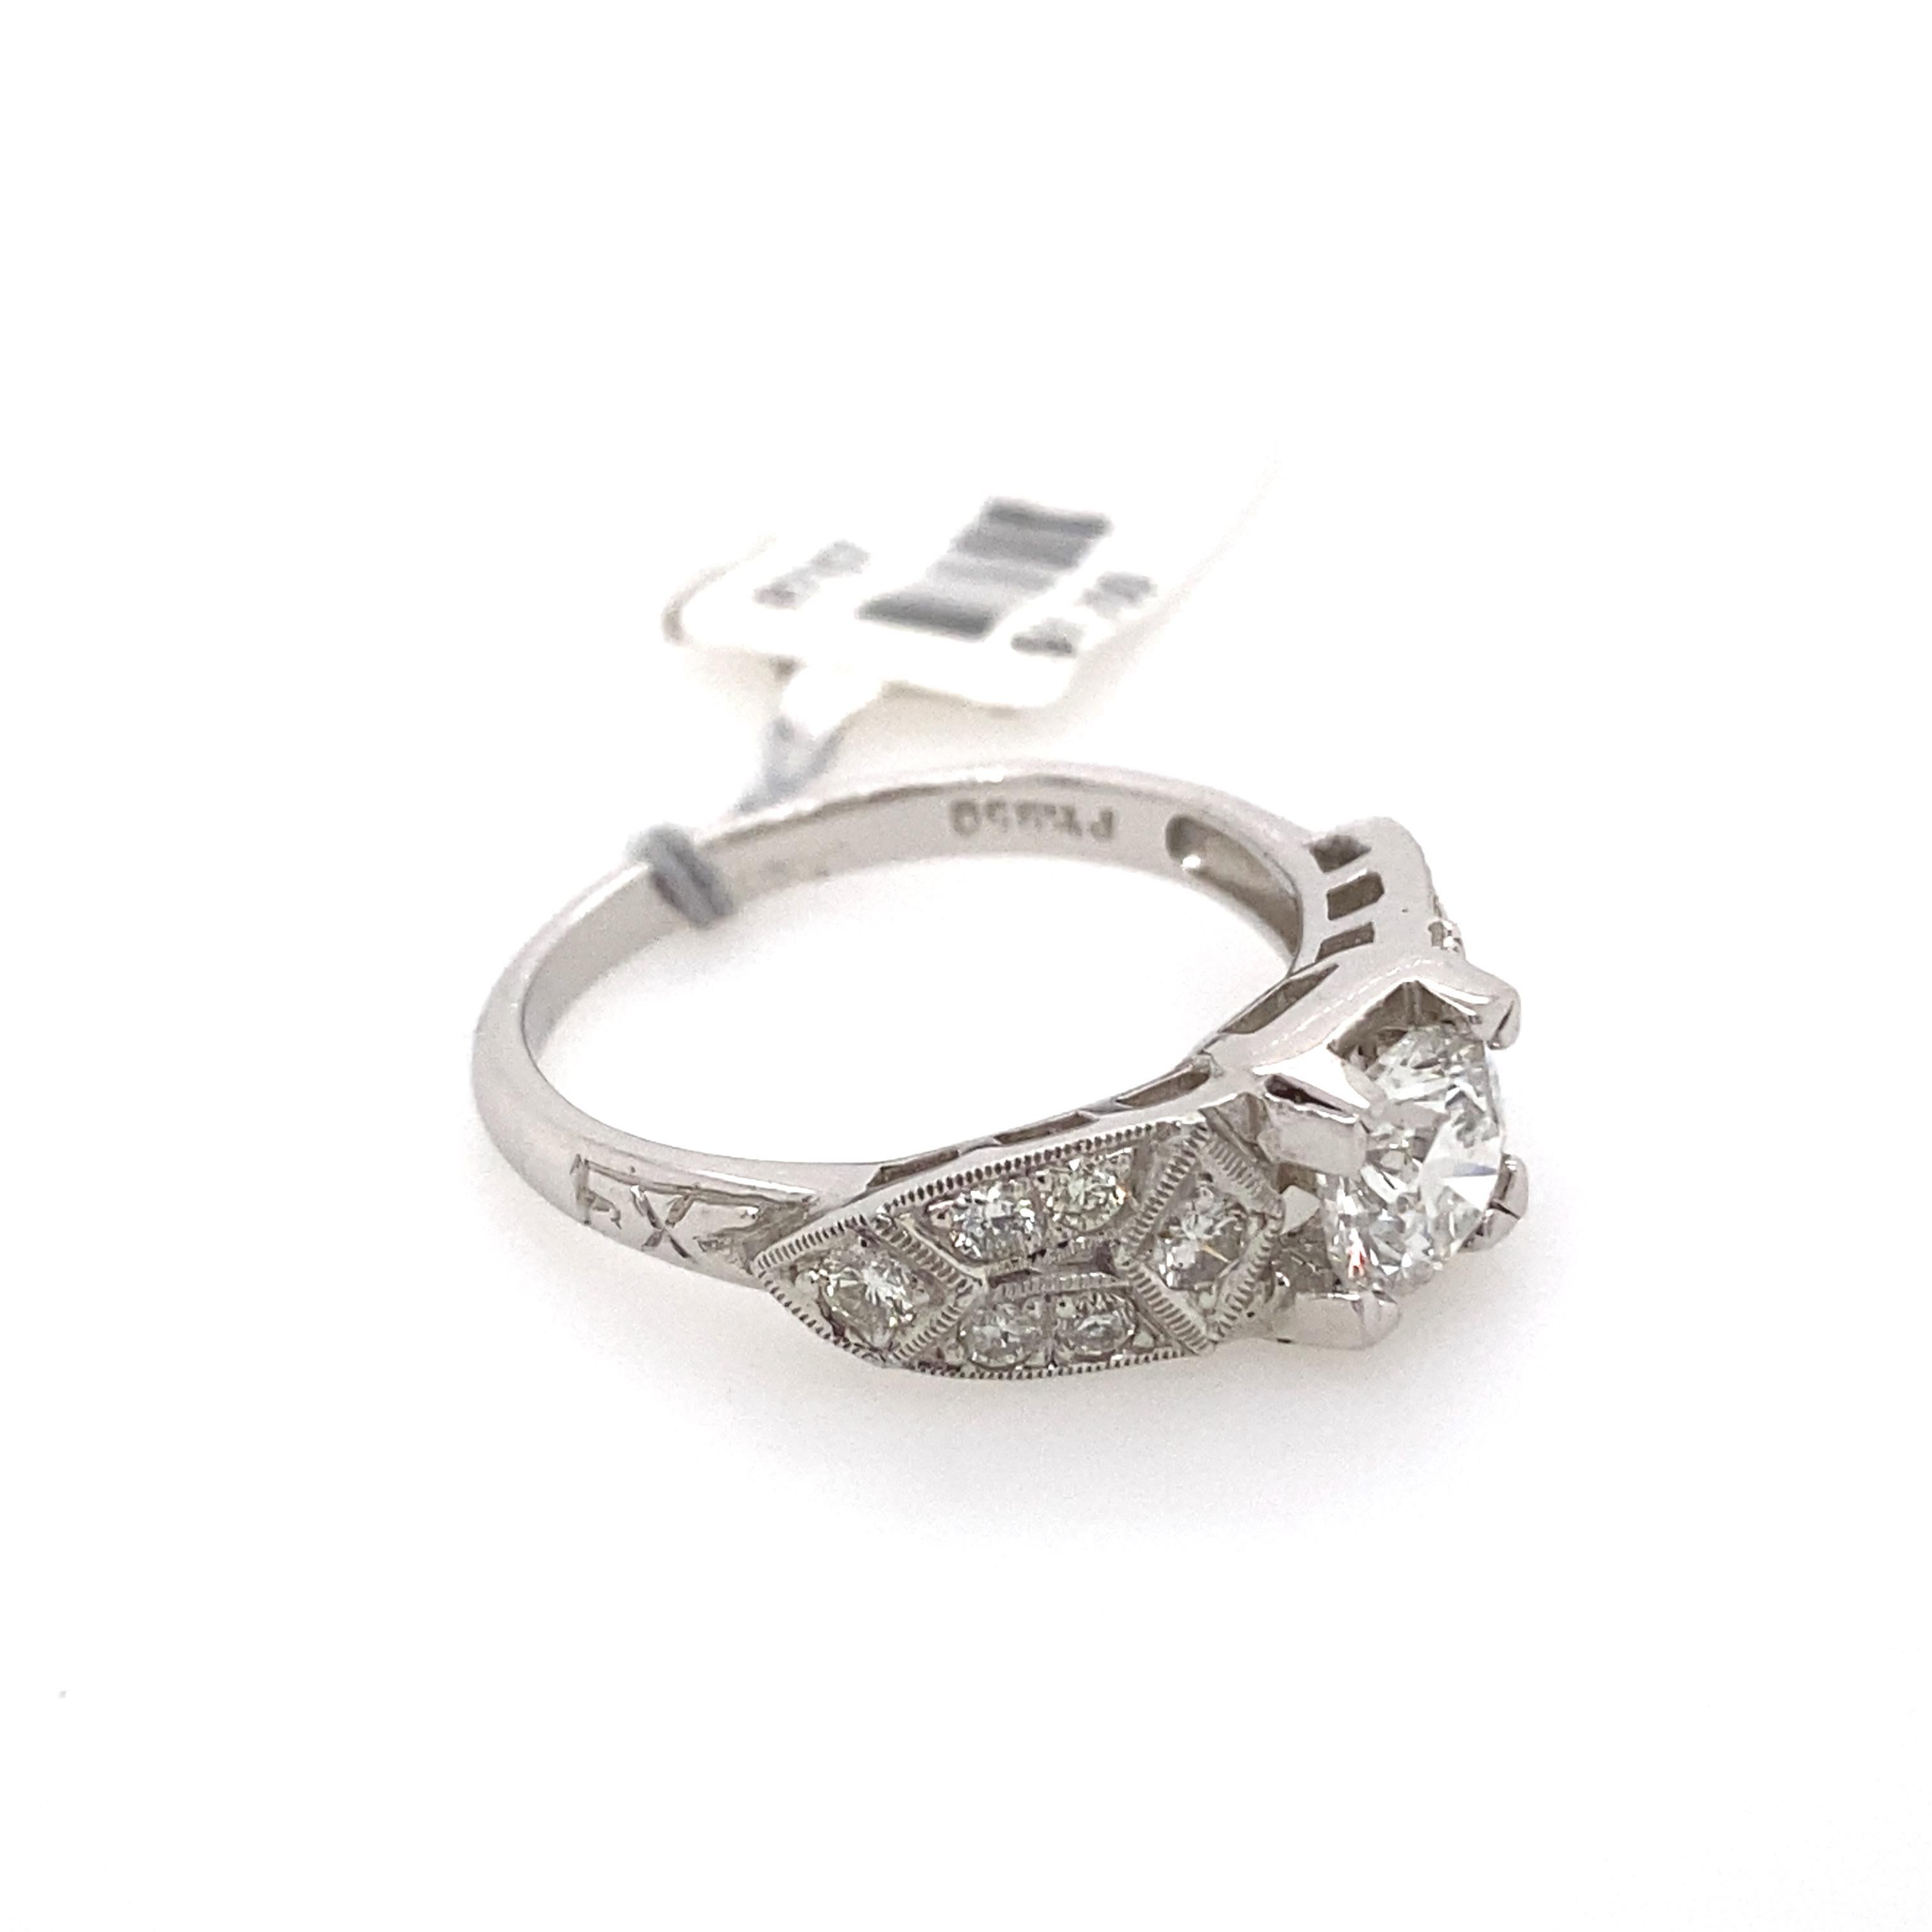 Edwardian style diamond ring with milgrain work. 
0.80ct center round brilliant diamond complimented with 0.50ct of round diamonds. 1.30ct total diamond weight. 18k white gold with milgrain and filigree work.
Accommodated with an up to date